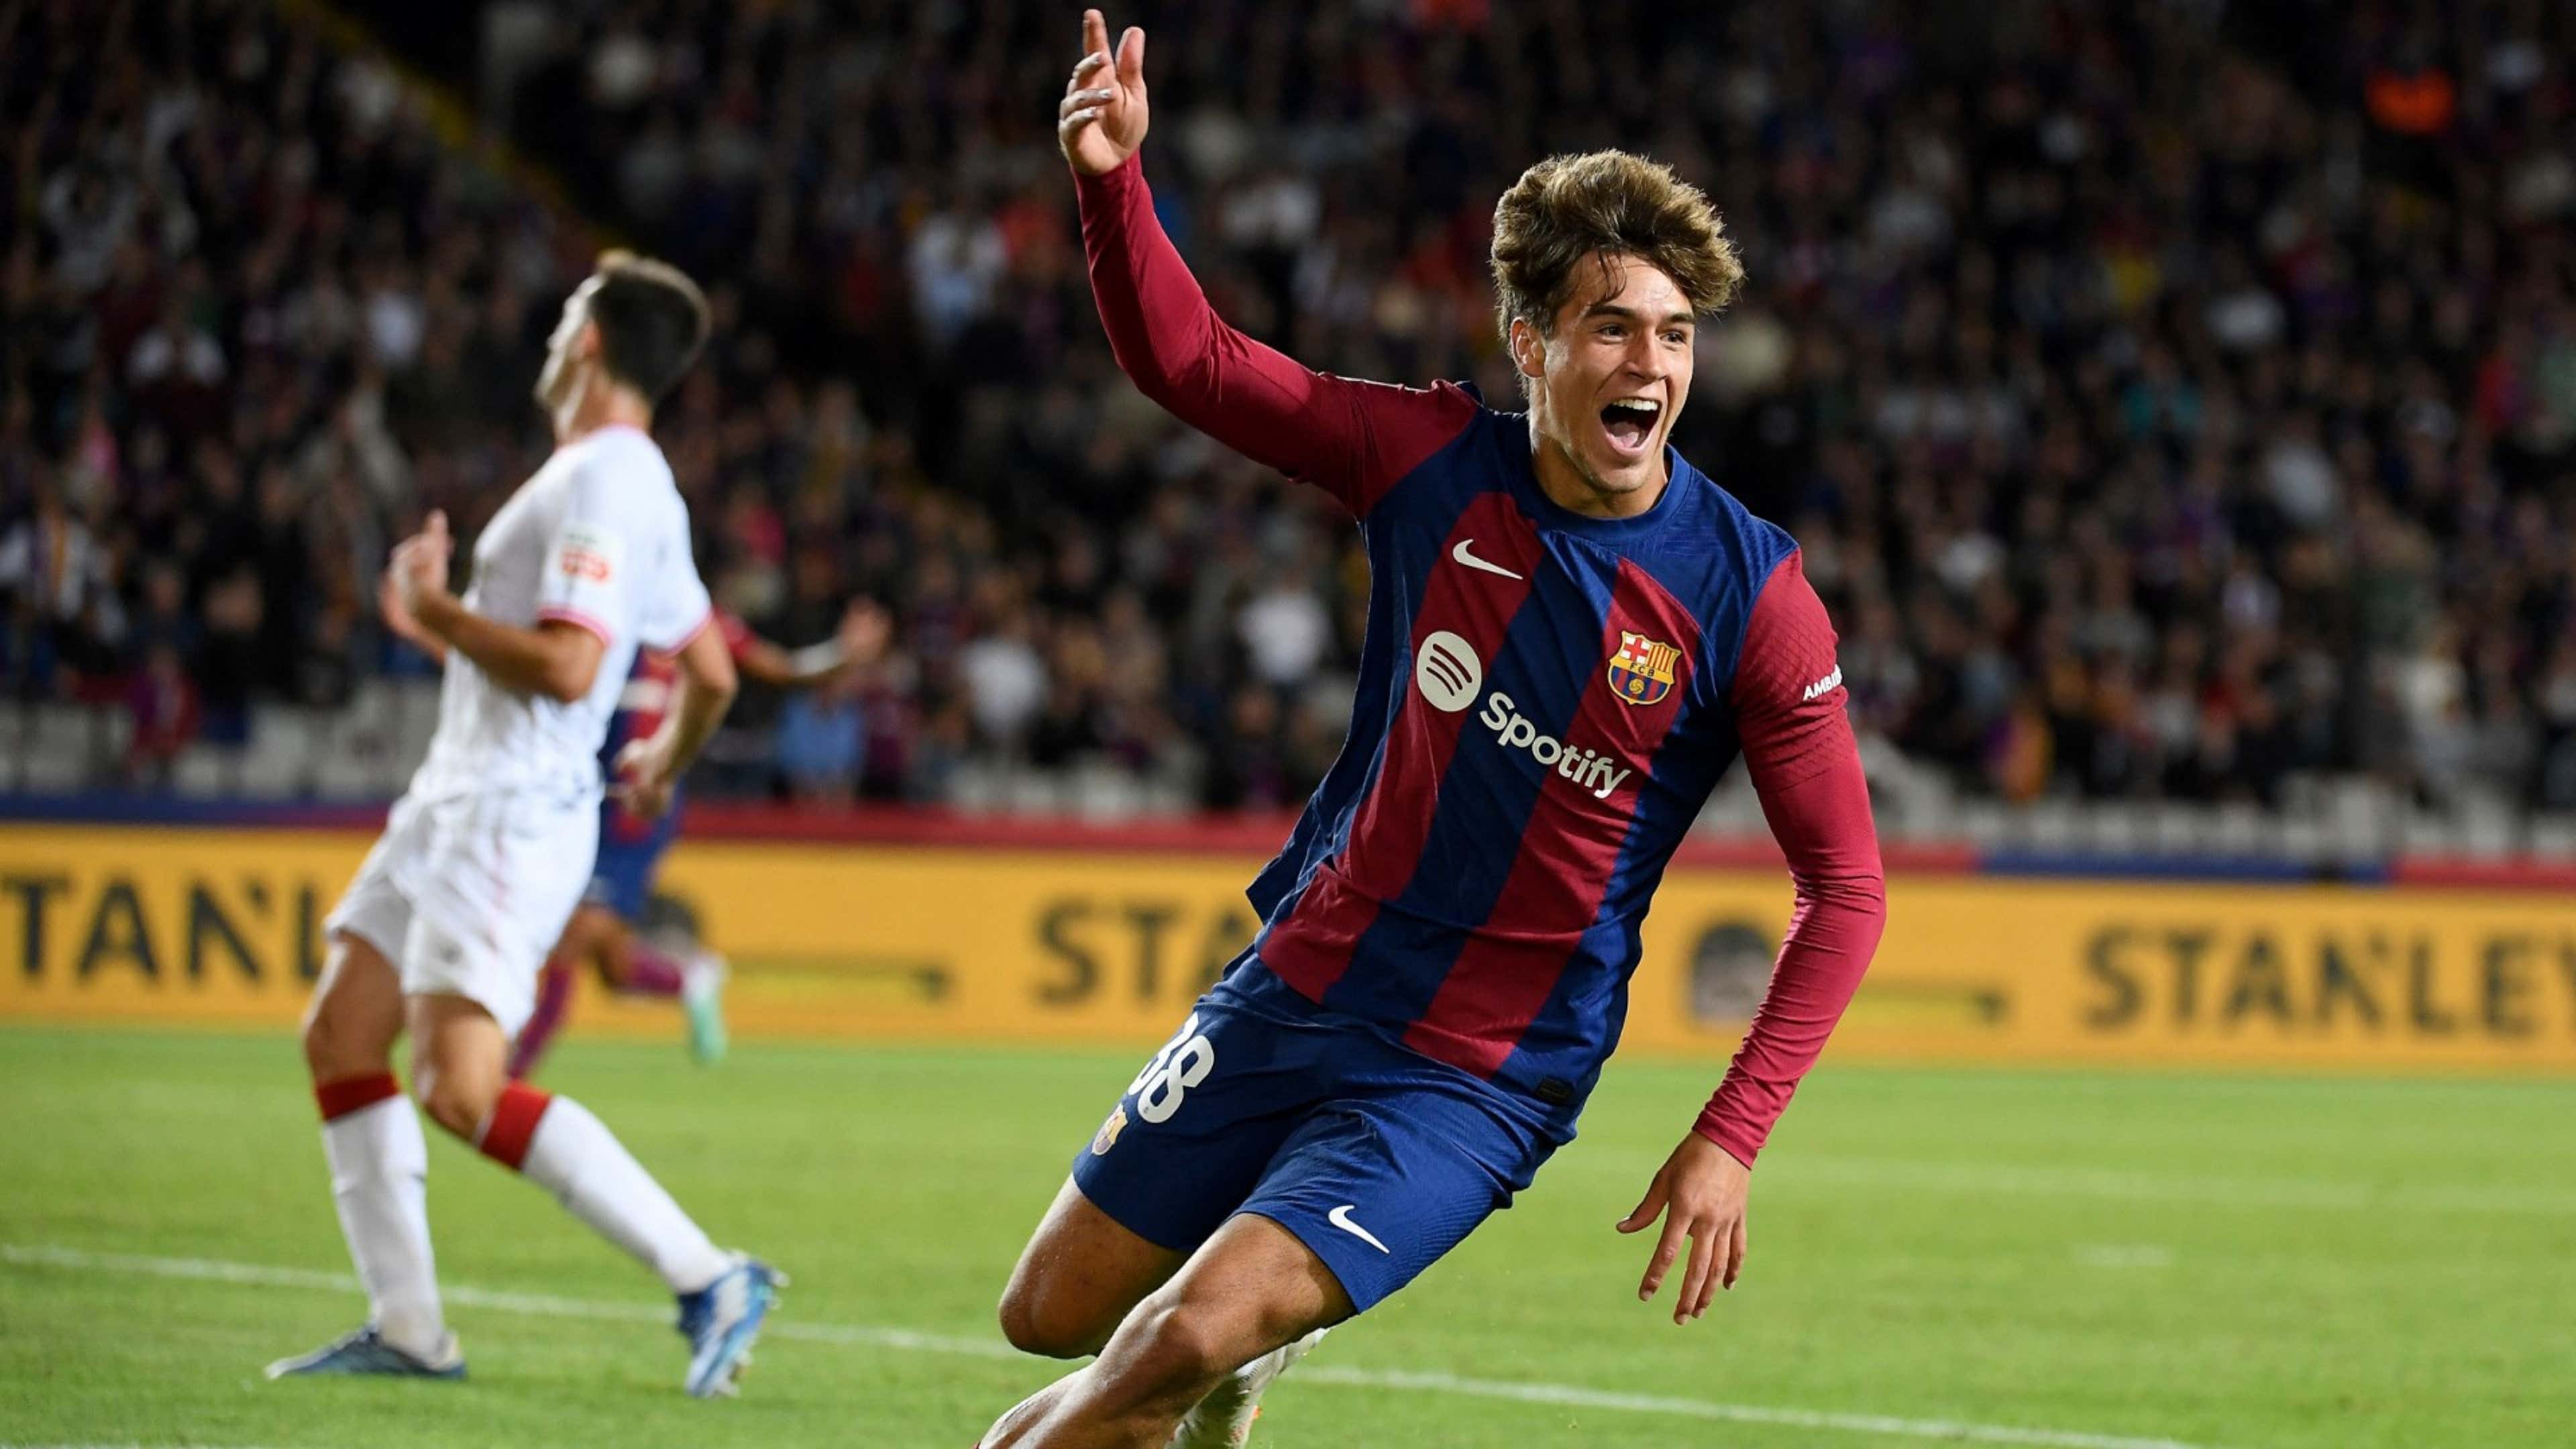  Marc Guiu celebrates a goal for Barcelona during a match at the Spotify Camp Nou stadium in Barcelona, Spain.